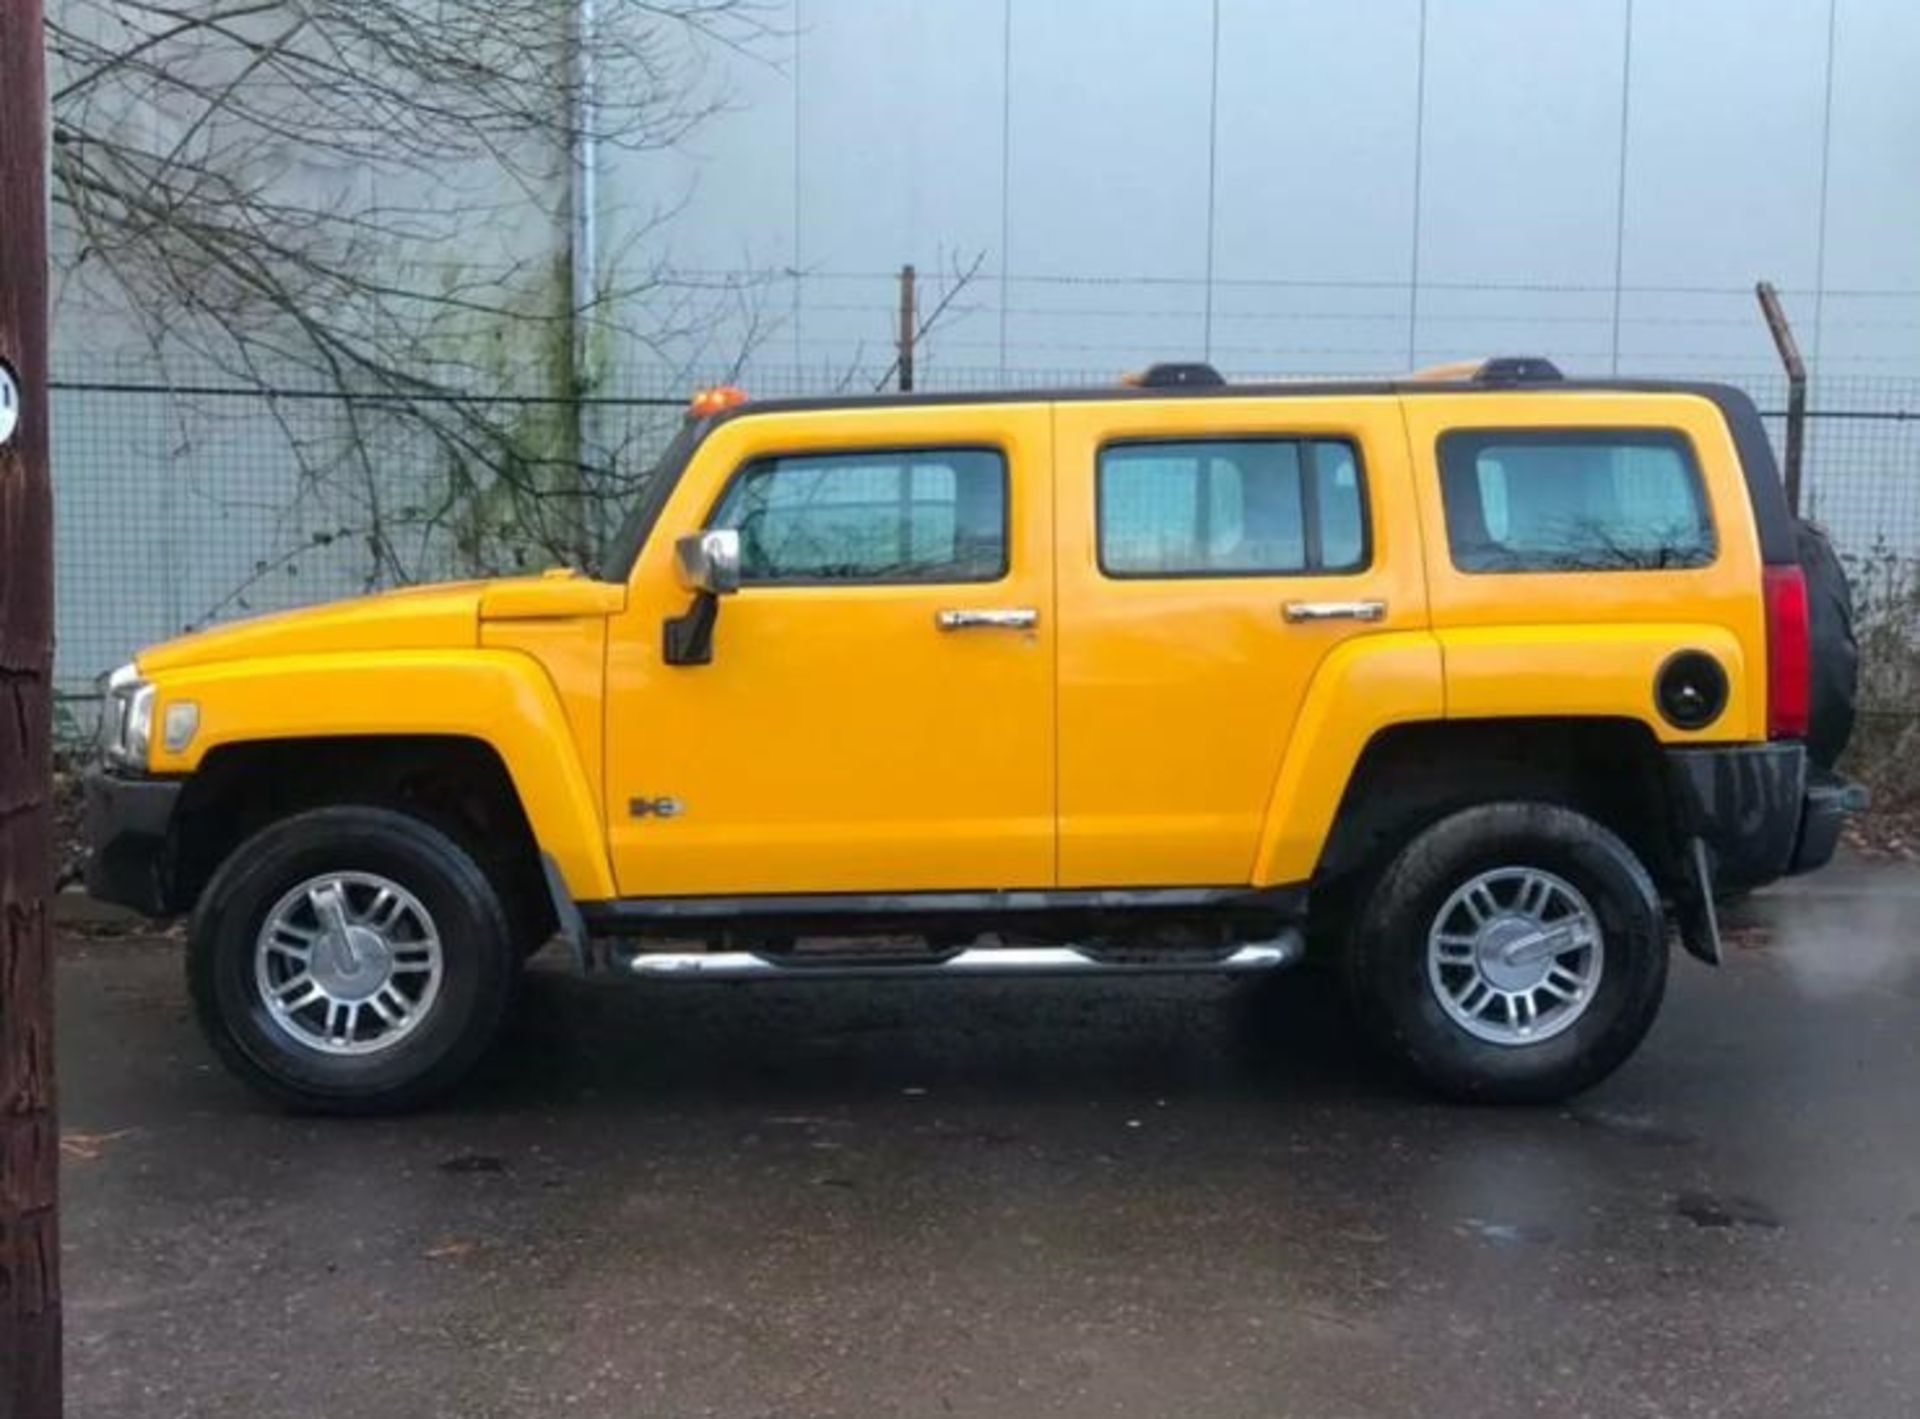 2007 HUMMER H3 3.5 LEFT HAND DRIVE YELLOW MODIFIED LHD *NO VAT* - Image 3 of 6